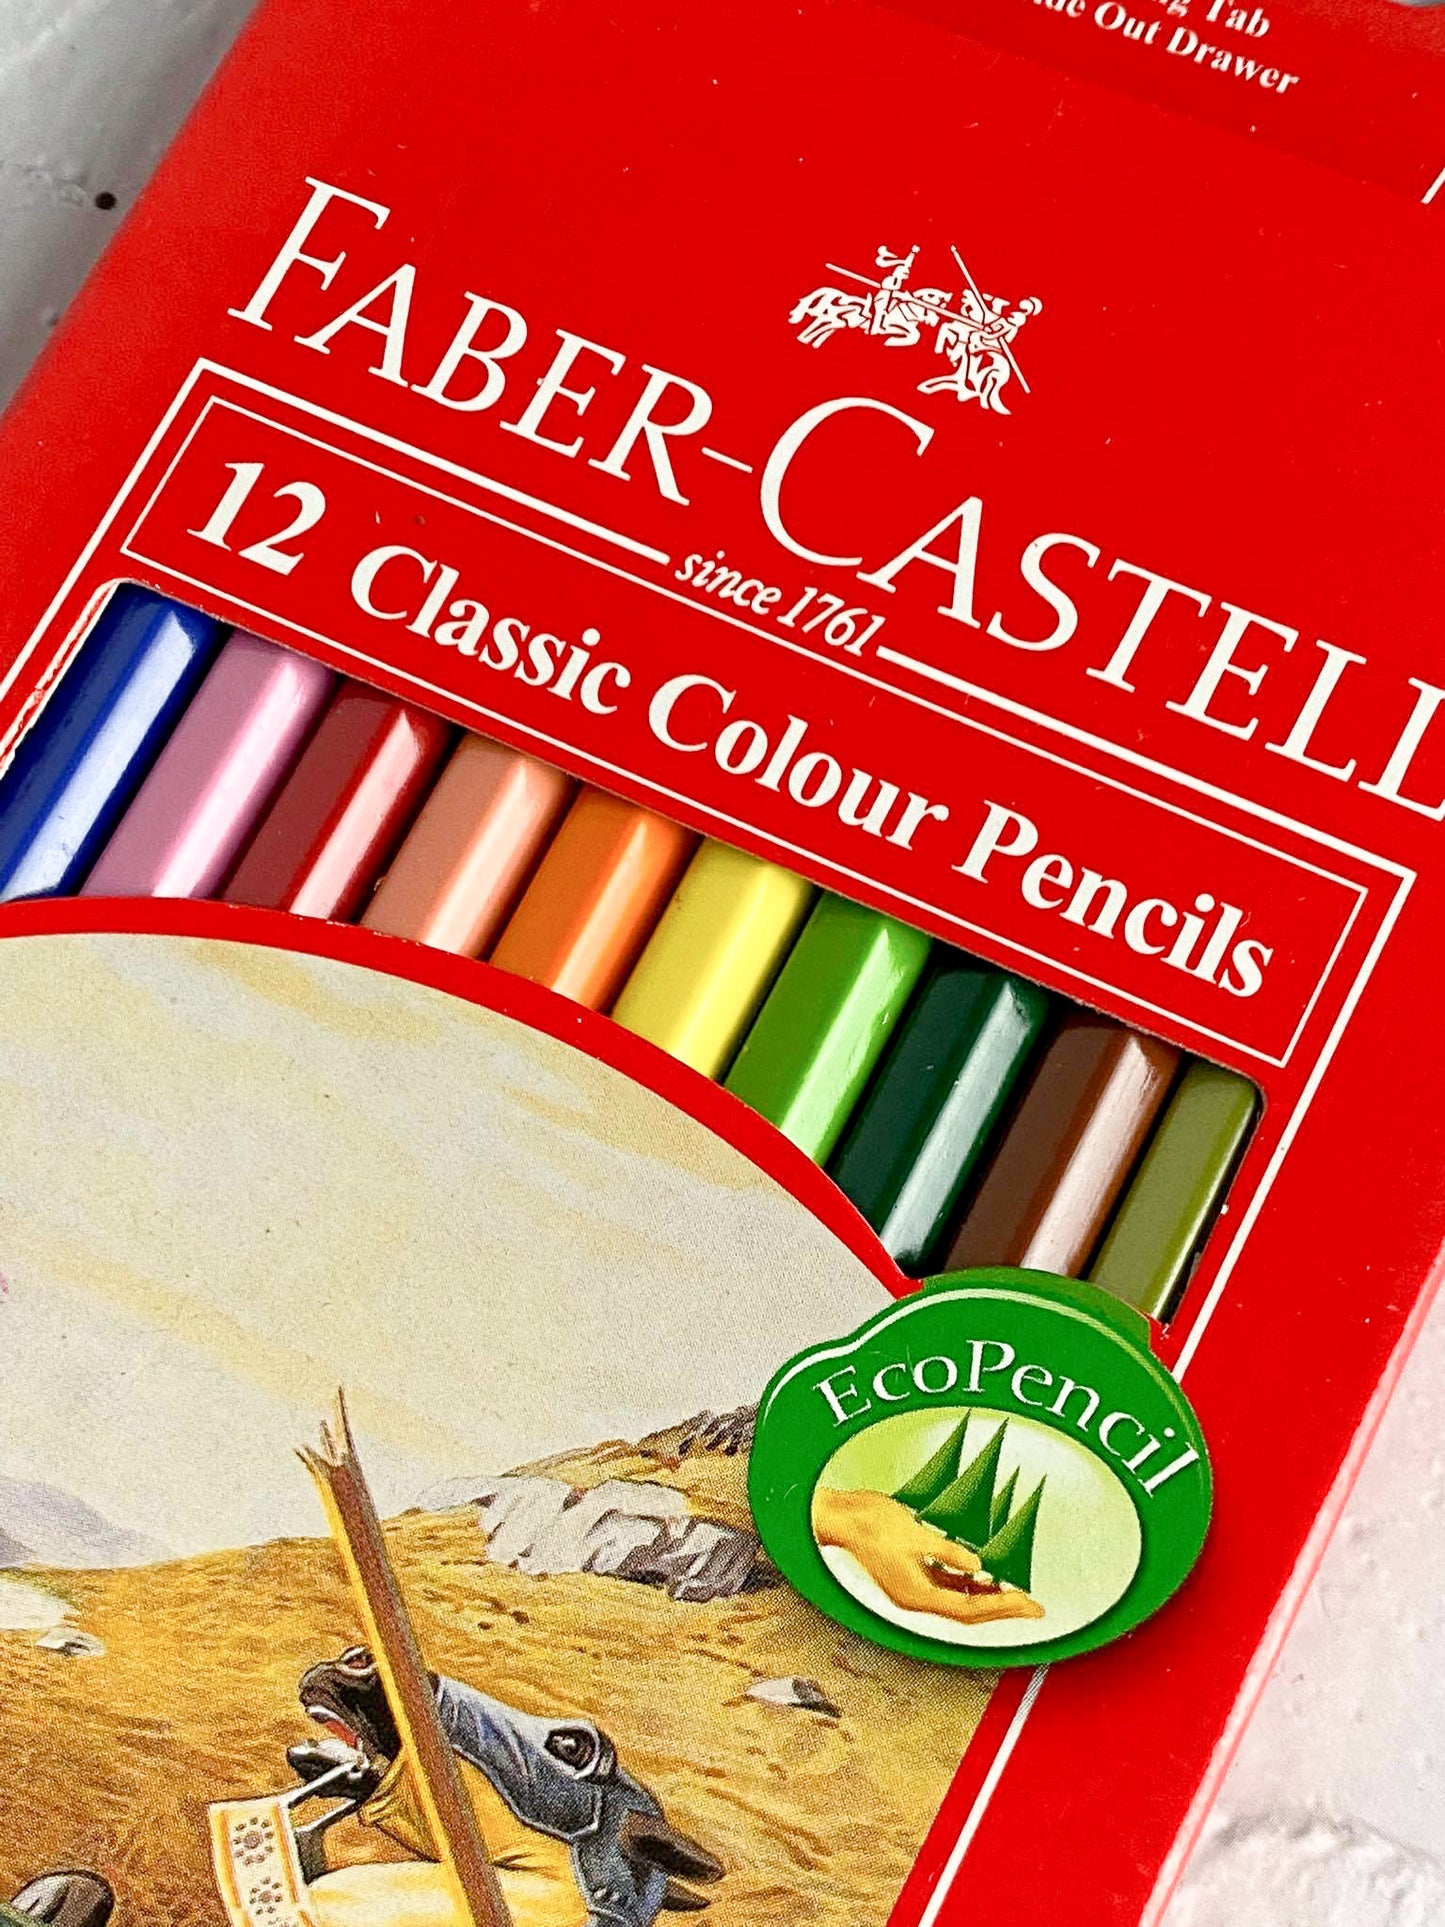 Faber Castell Colored Pencil Classic 12